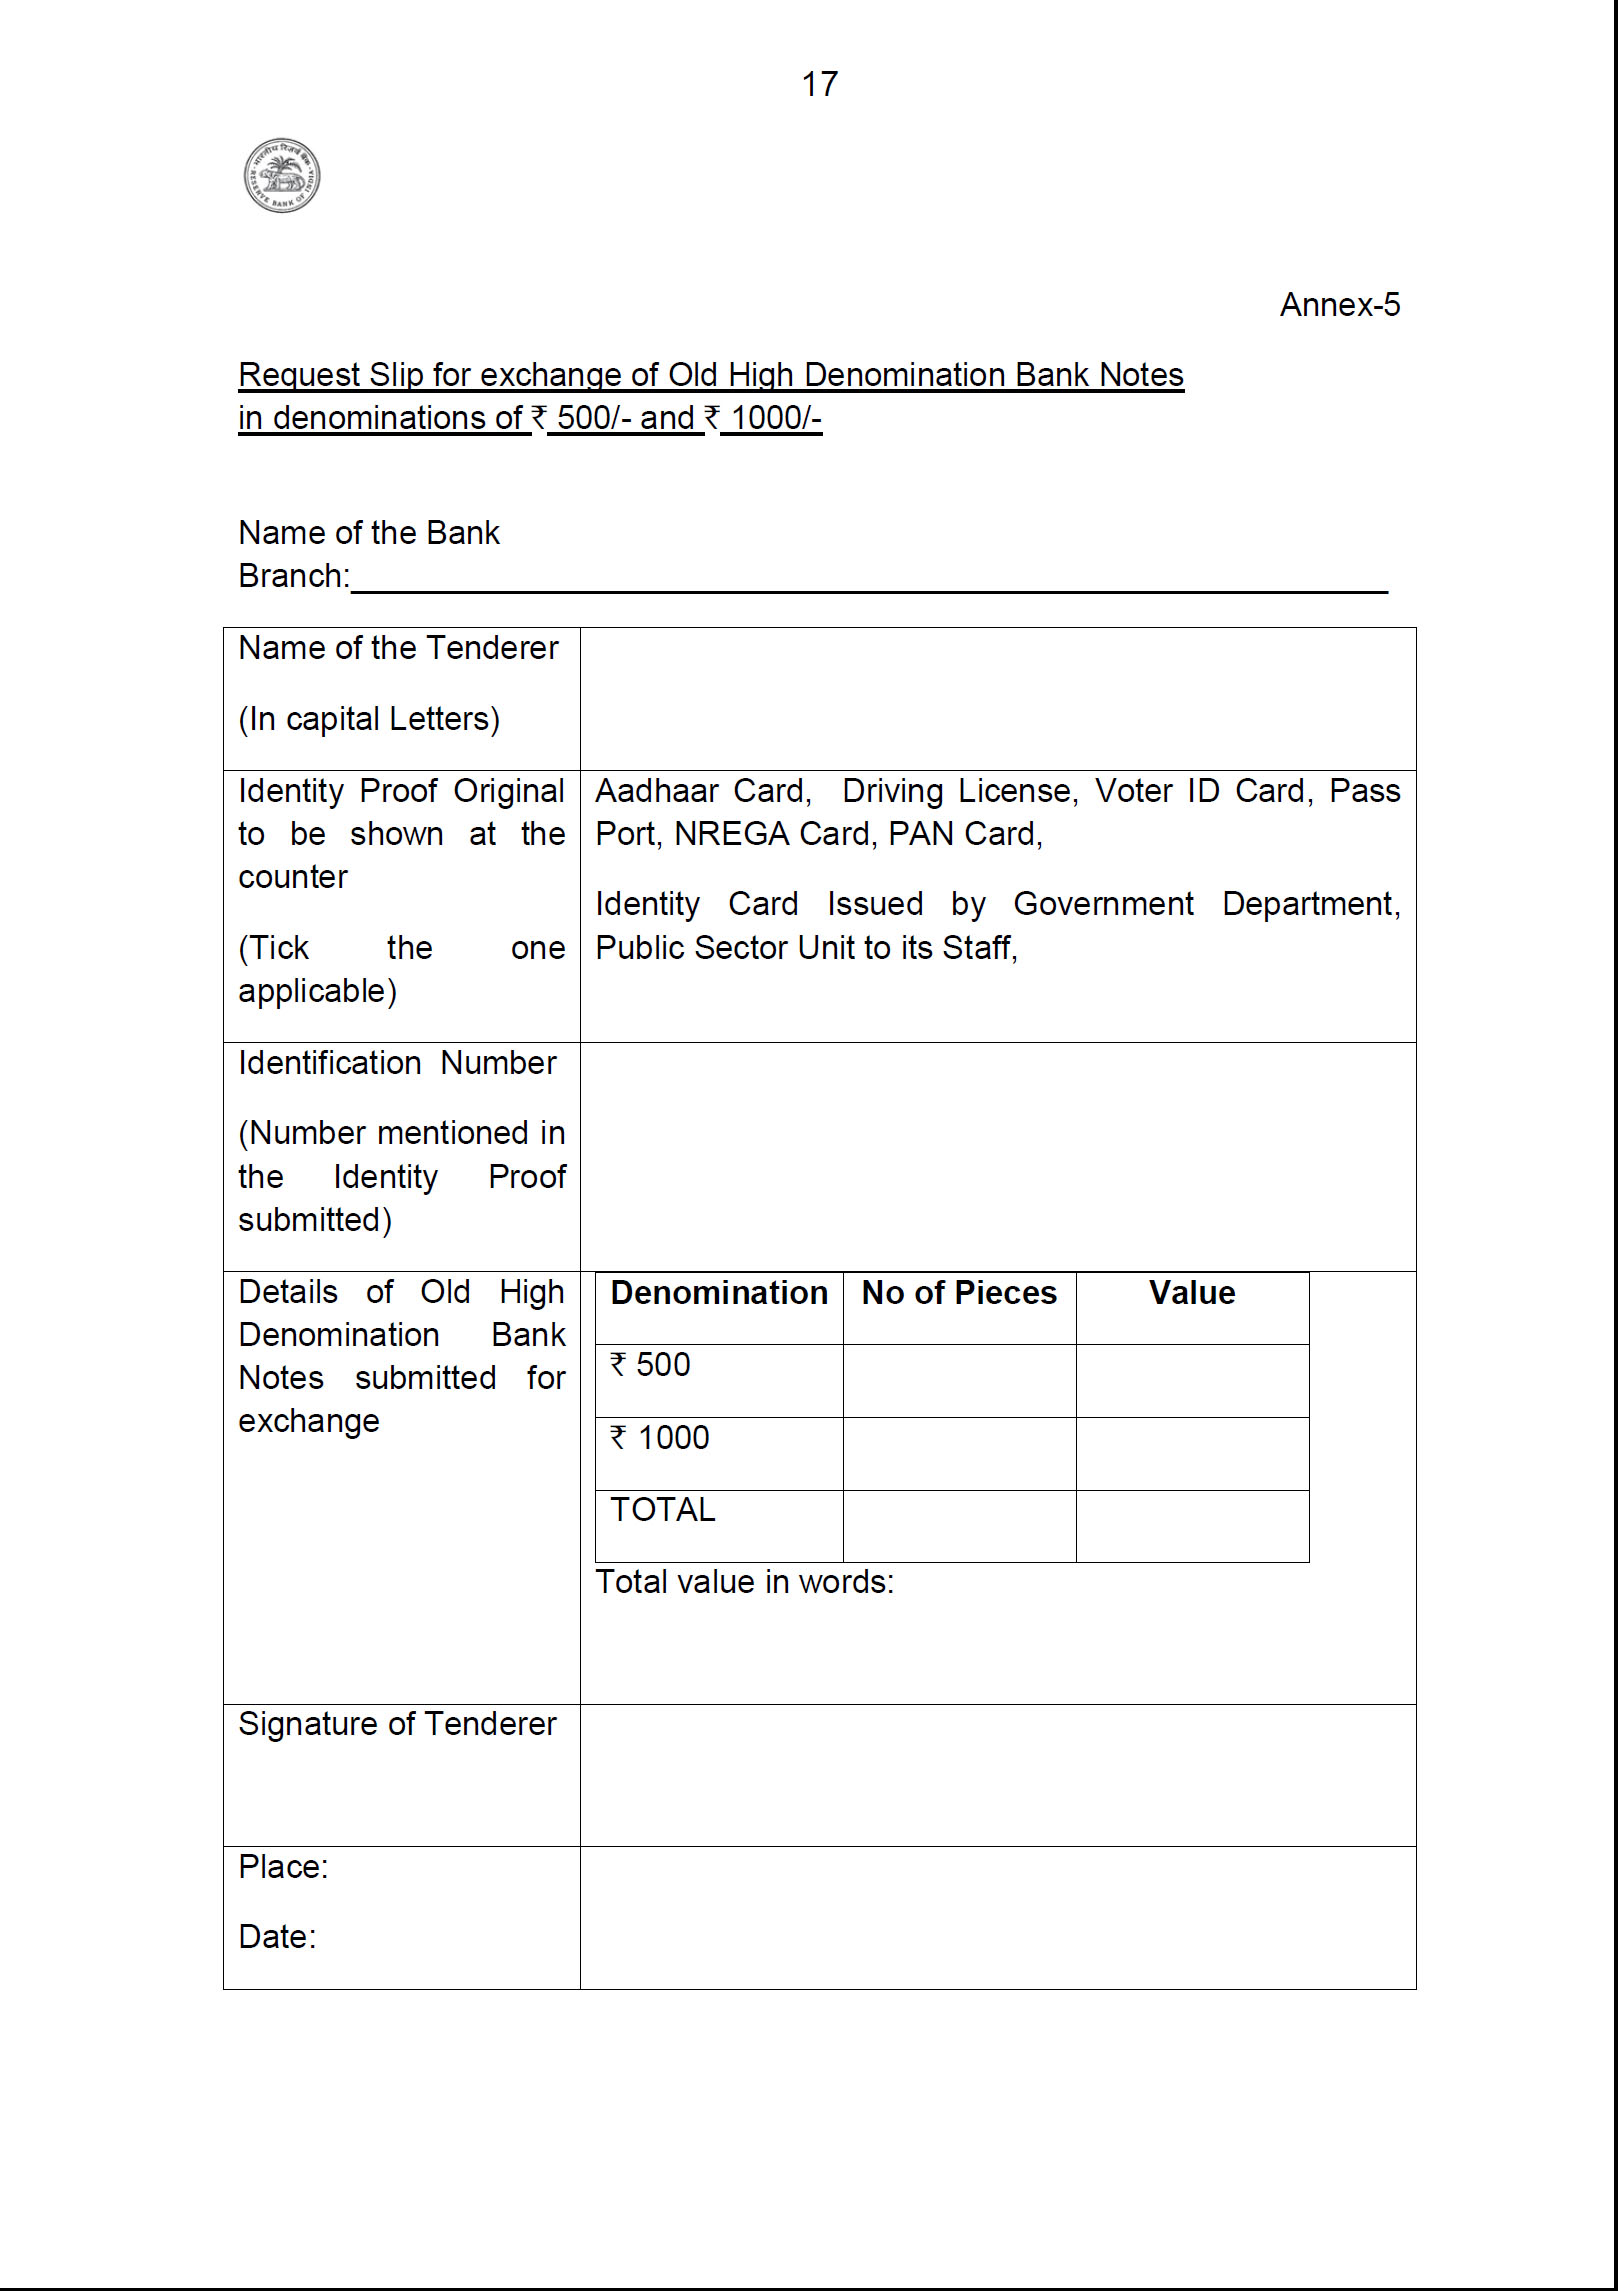 Request Slip for exchange of Old High Denomination Bank Notesin denominations of Rs.500/- and Rs.1000/-